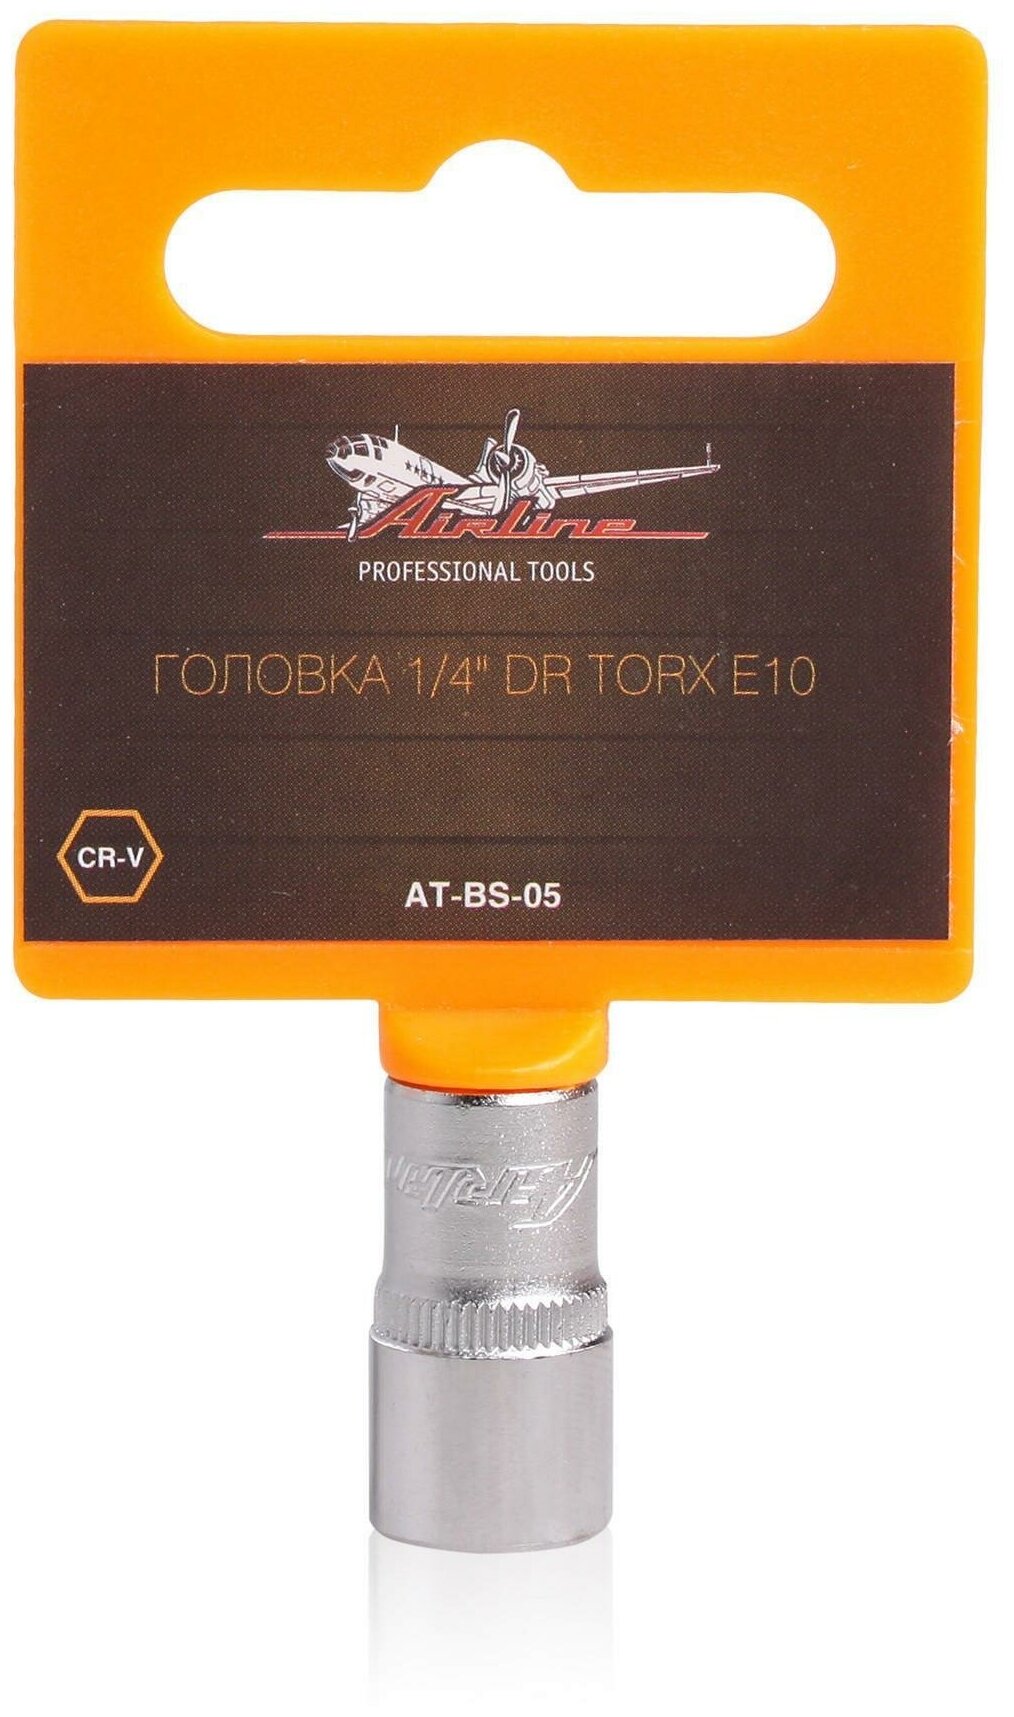 Головка 1/4' DR TORX E10 (AT-BS-05) AIRLINE